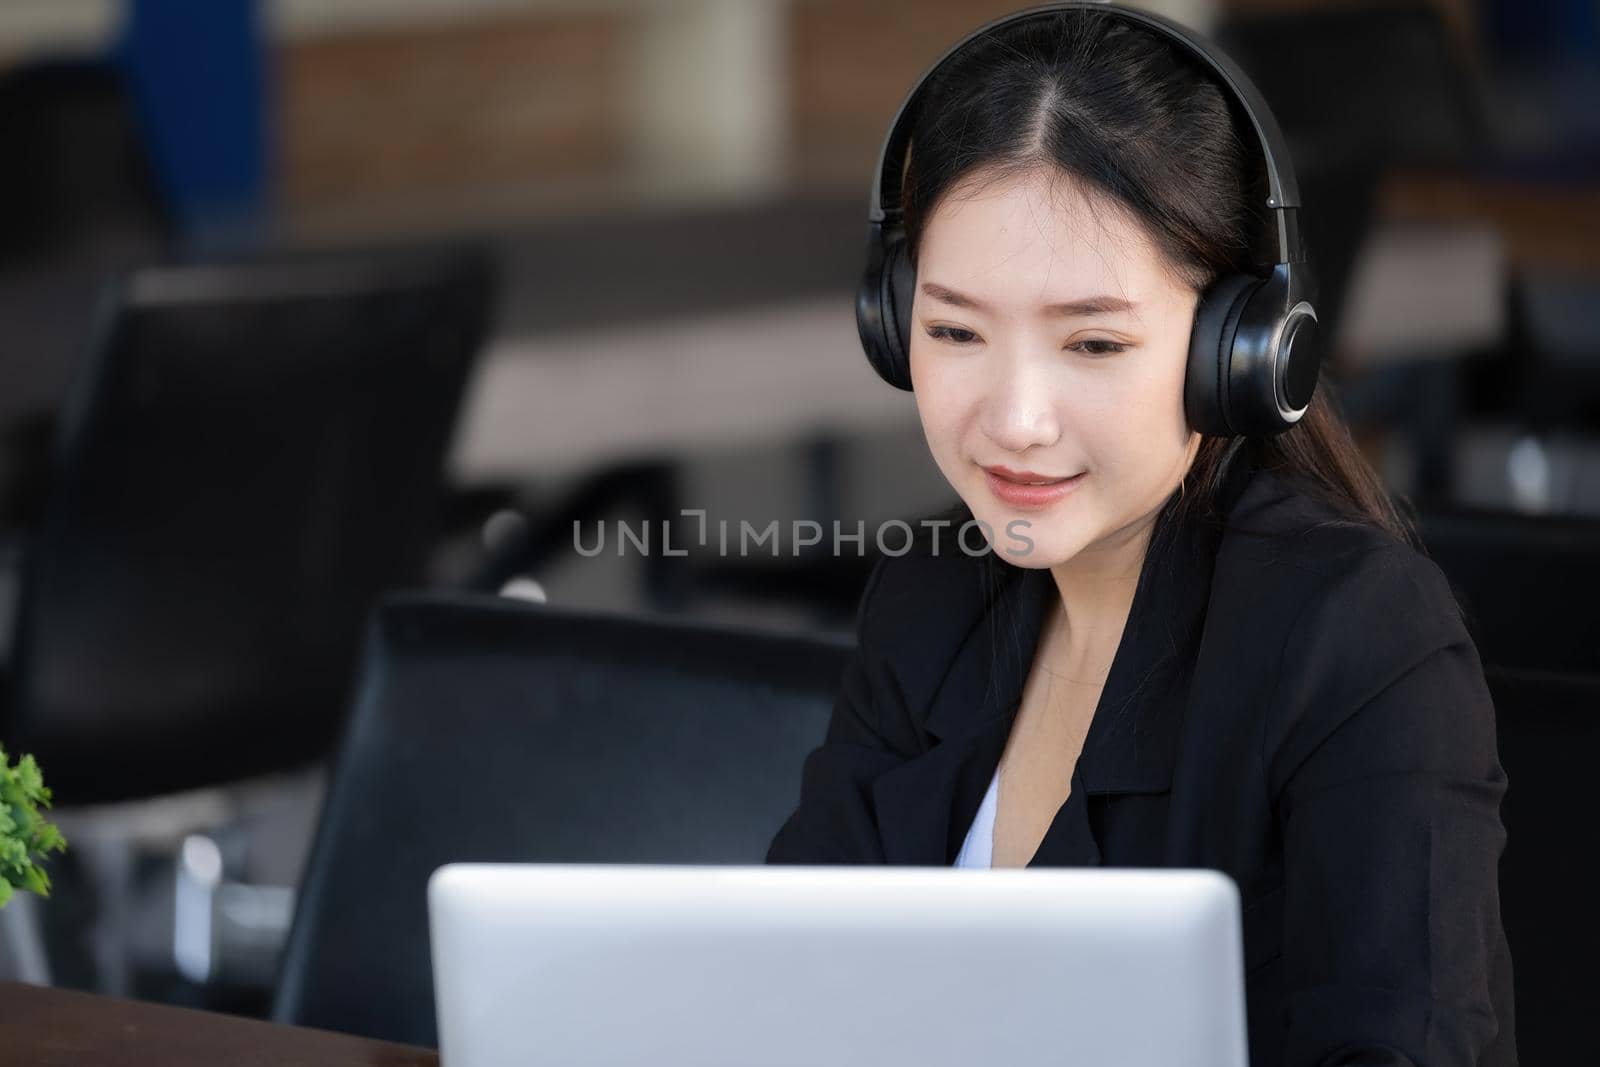 Concept of taking a break from work, an accountant or a female company employee or a business owner is using headphones to listen to music to relieve stress and fatigue from work